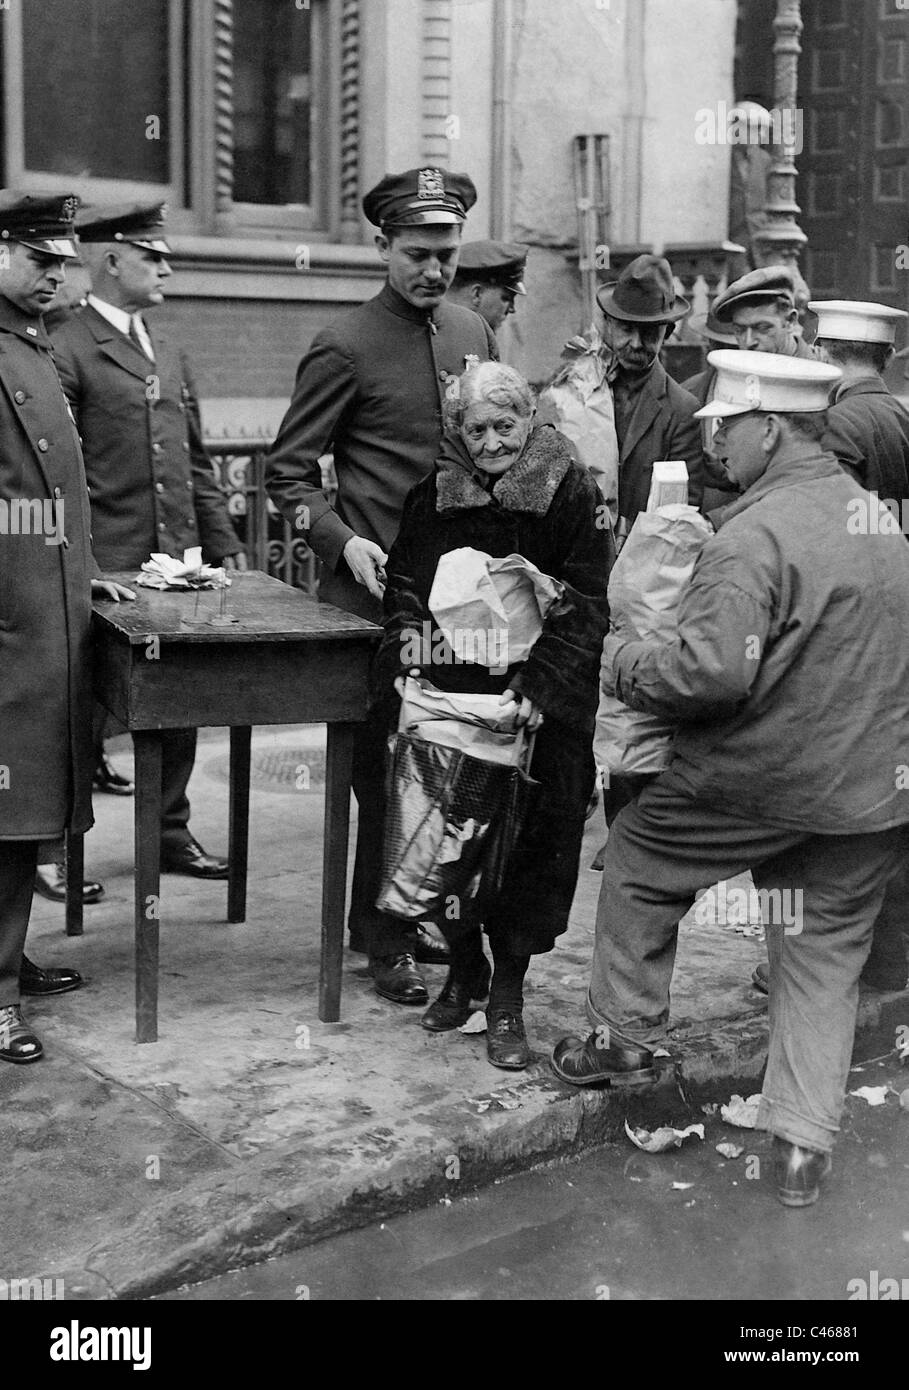 Police officers distribute food to people in need, 1932 Stock Photo